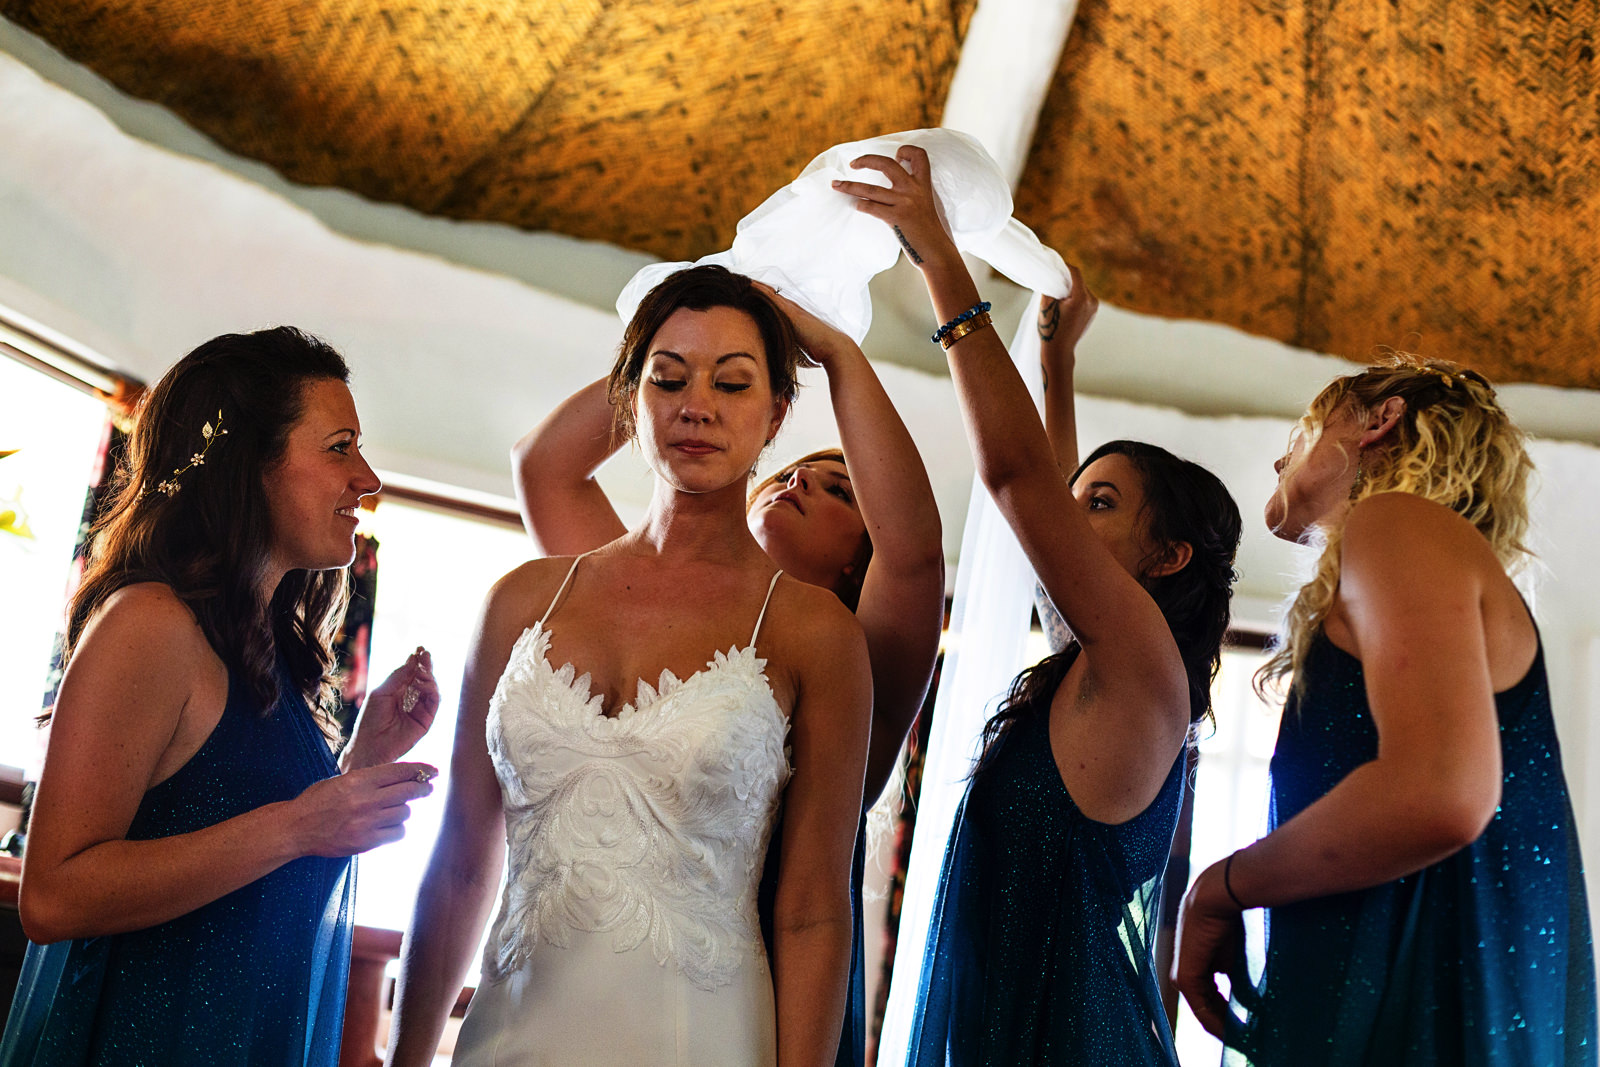 Bridesmaids helping the bride to put on the wedding veil